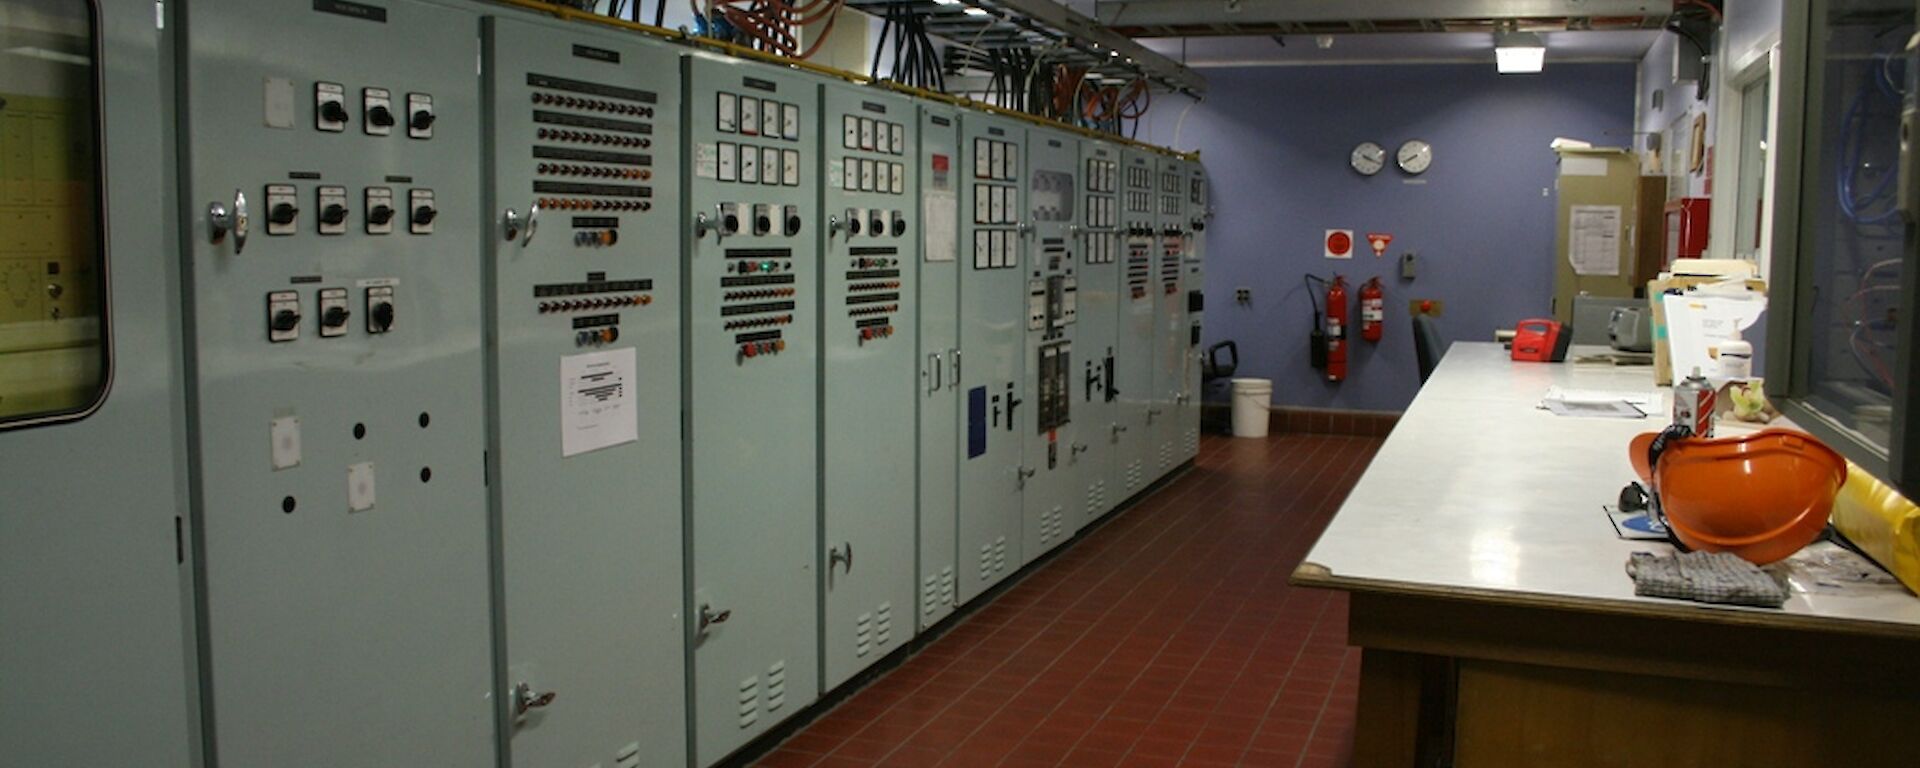 The main electrical control panel